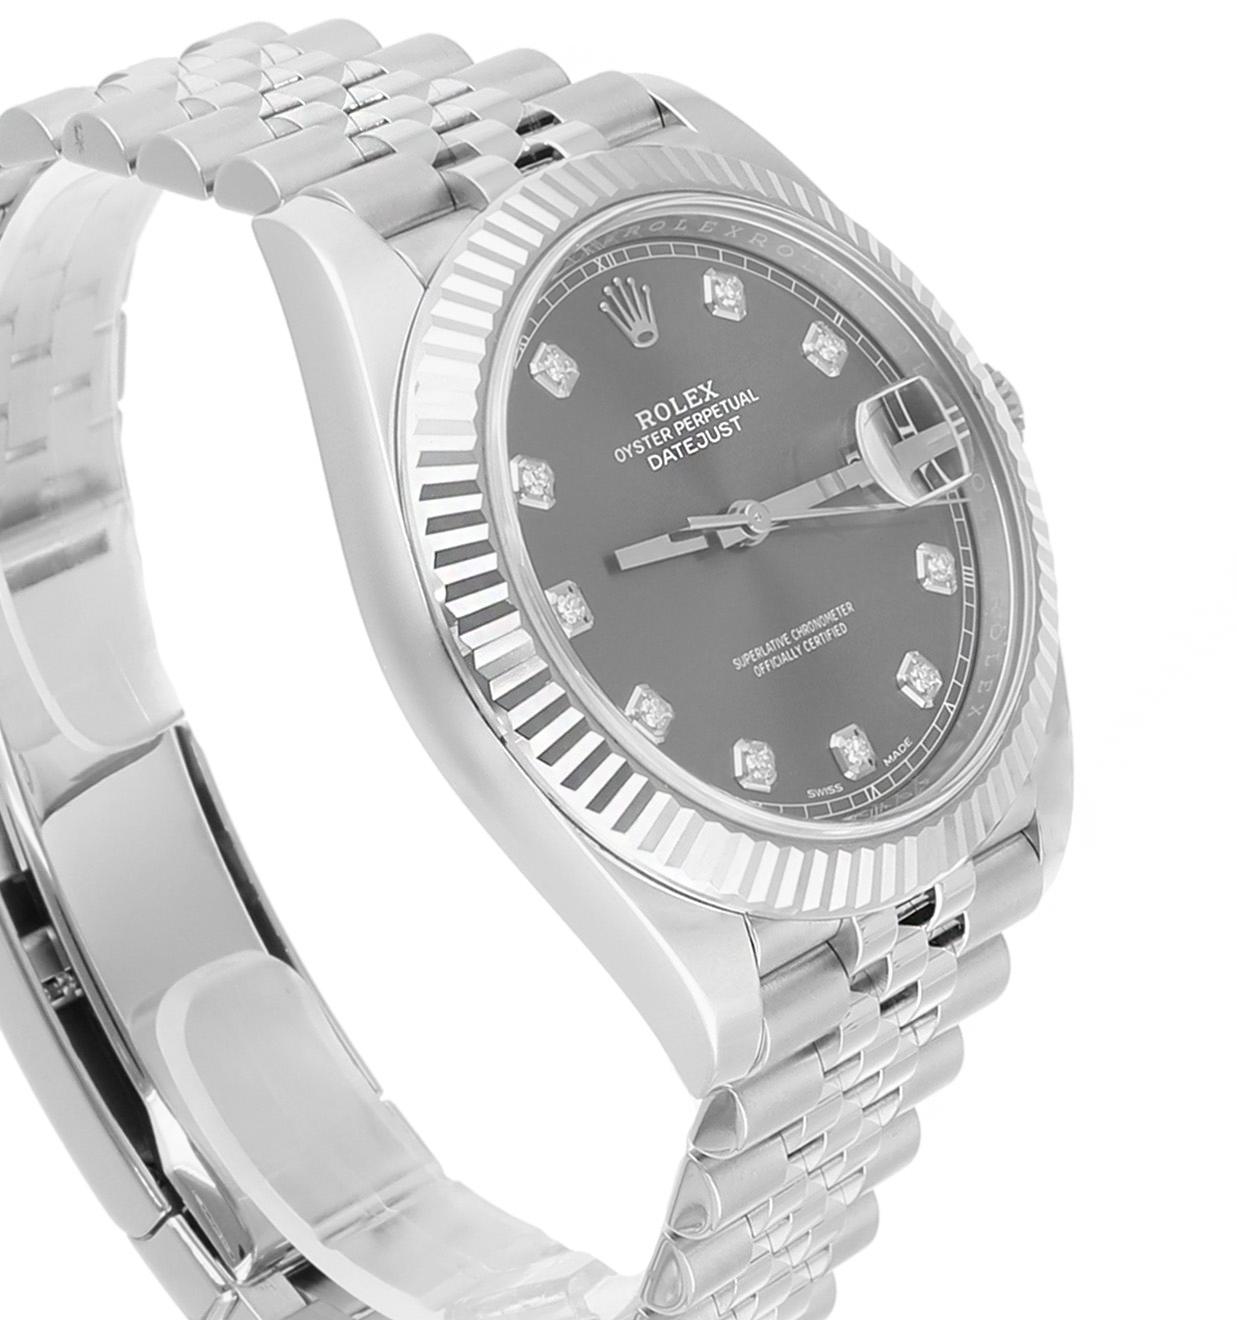 Rolex Datejust 41mm Jubilee Stainless Steel Watch Rhodium Diamond Dial 126334 For Sale 1